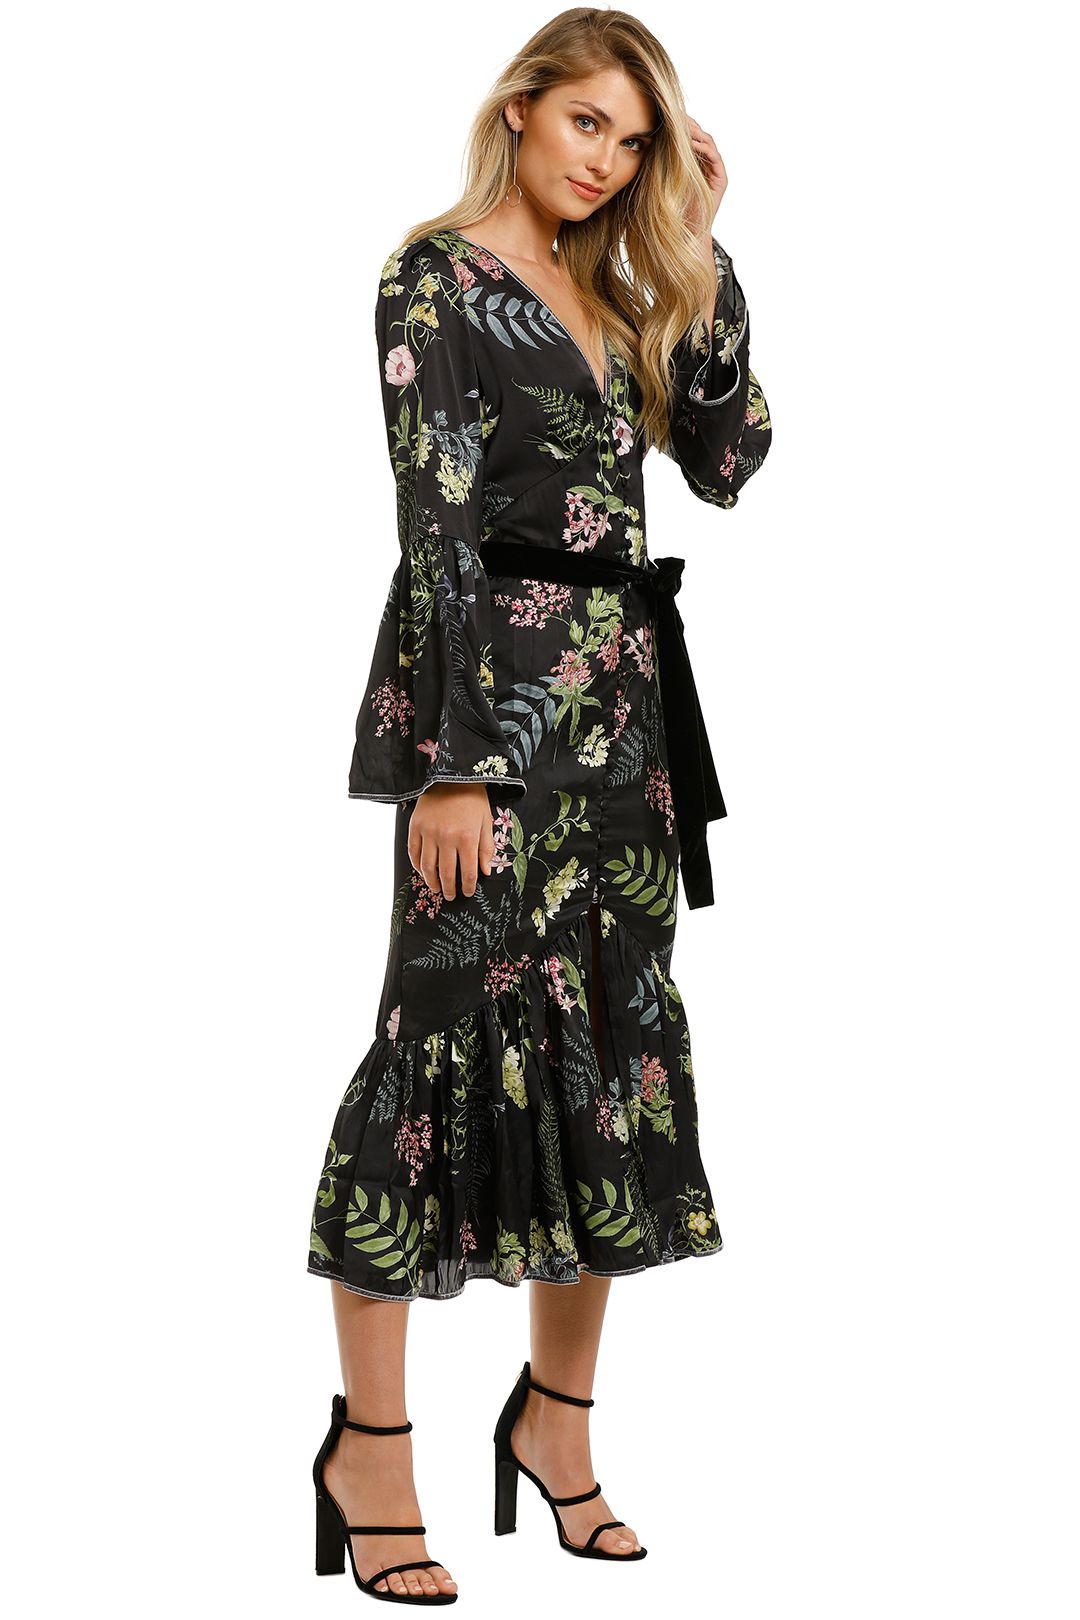 We-Are-Kindred-Eloise-Button-Through-Dress-Black-Delphinium-Side